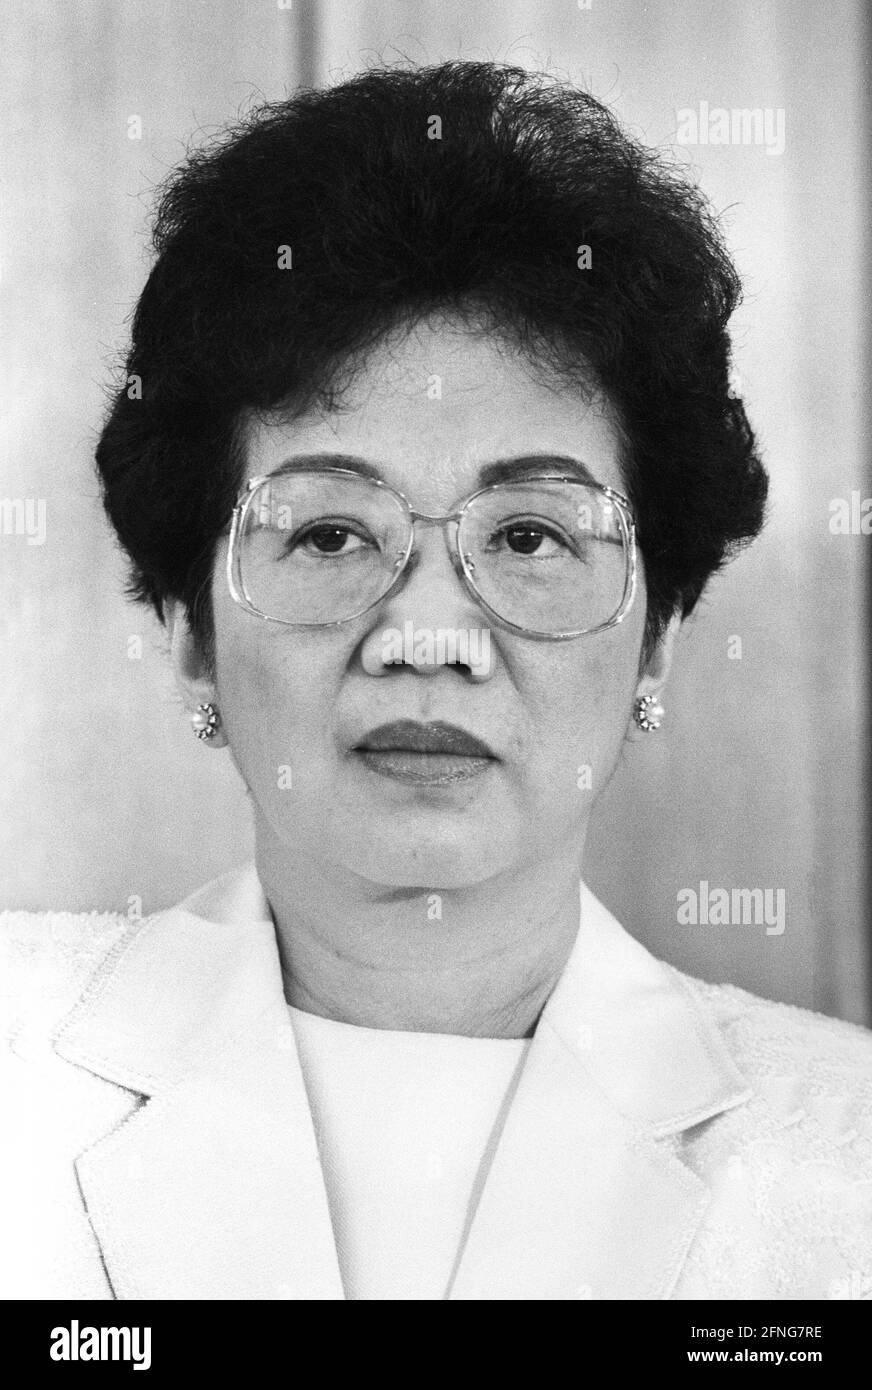 Germany, Bonn, 11.07.1989. Archive No: 07-10-03 State visit of the President of the Philippines Photo: President Corazon Aquino [automated translation] Stock Photo